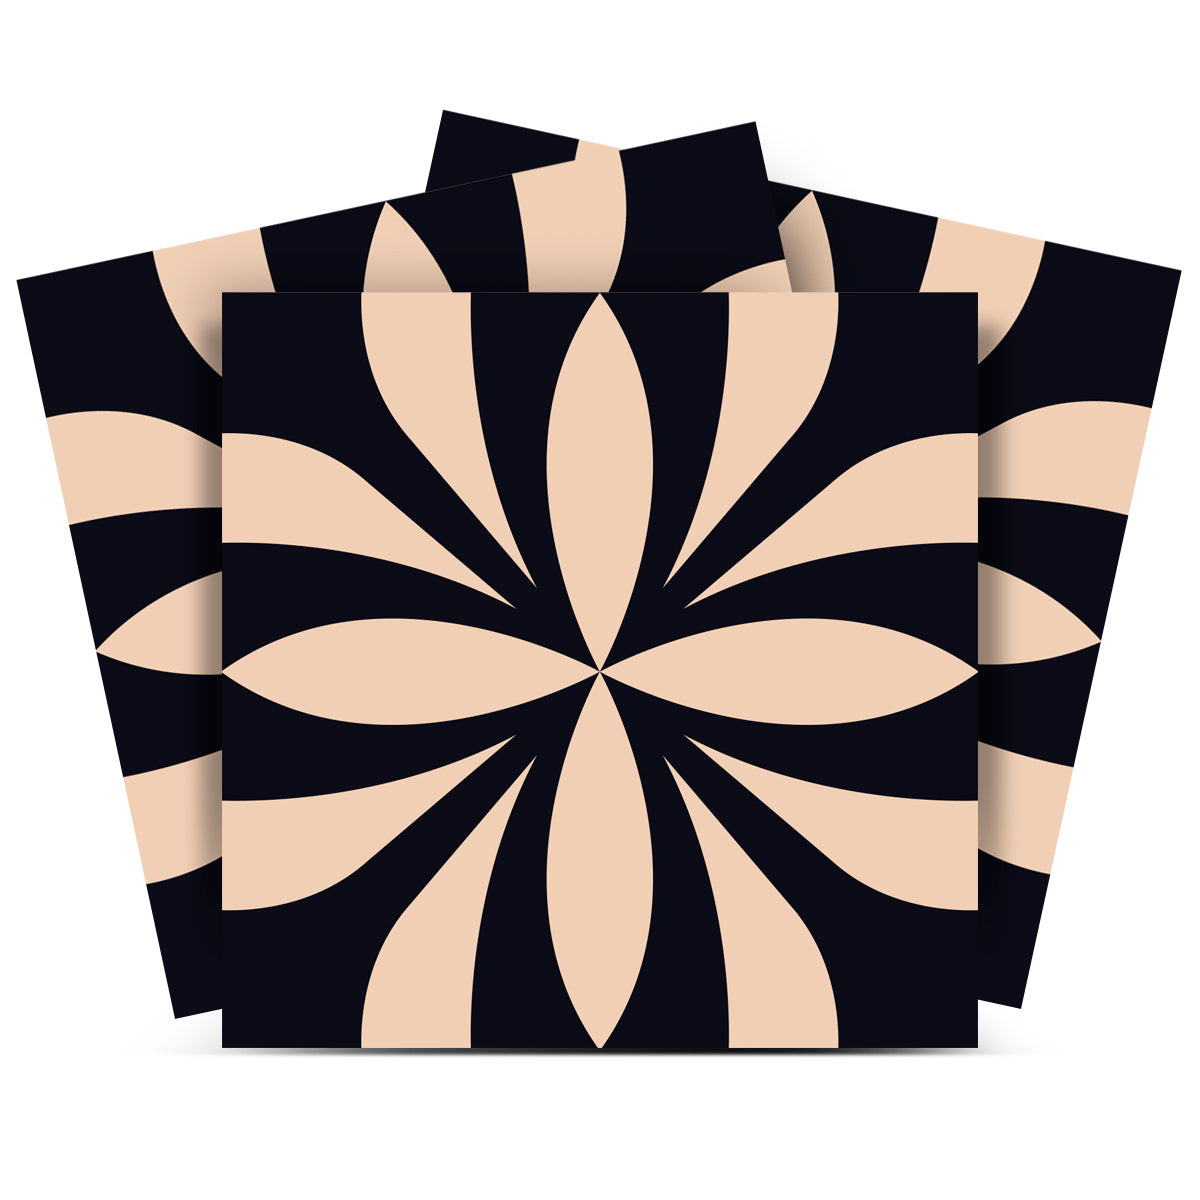 4" X 4" Intertwined Black And Cream Peel And Stick Removable Tiles-390768-1